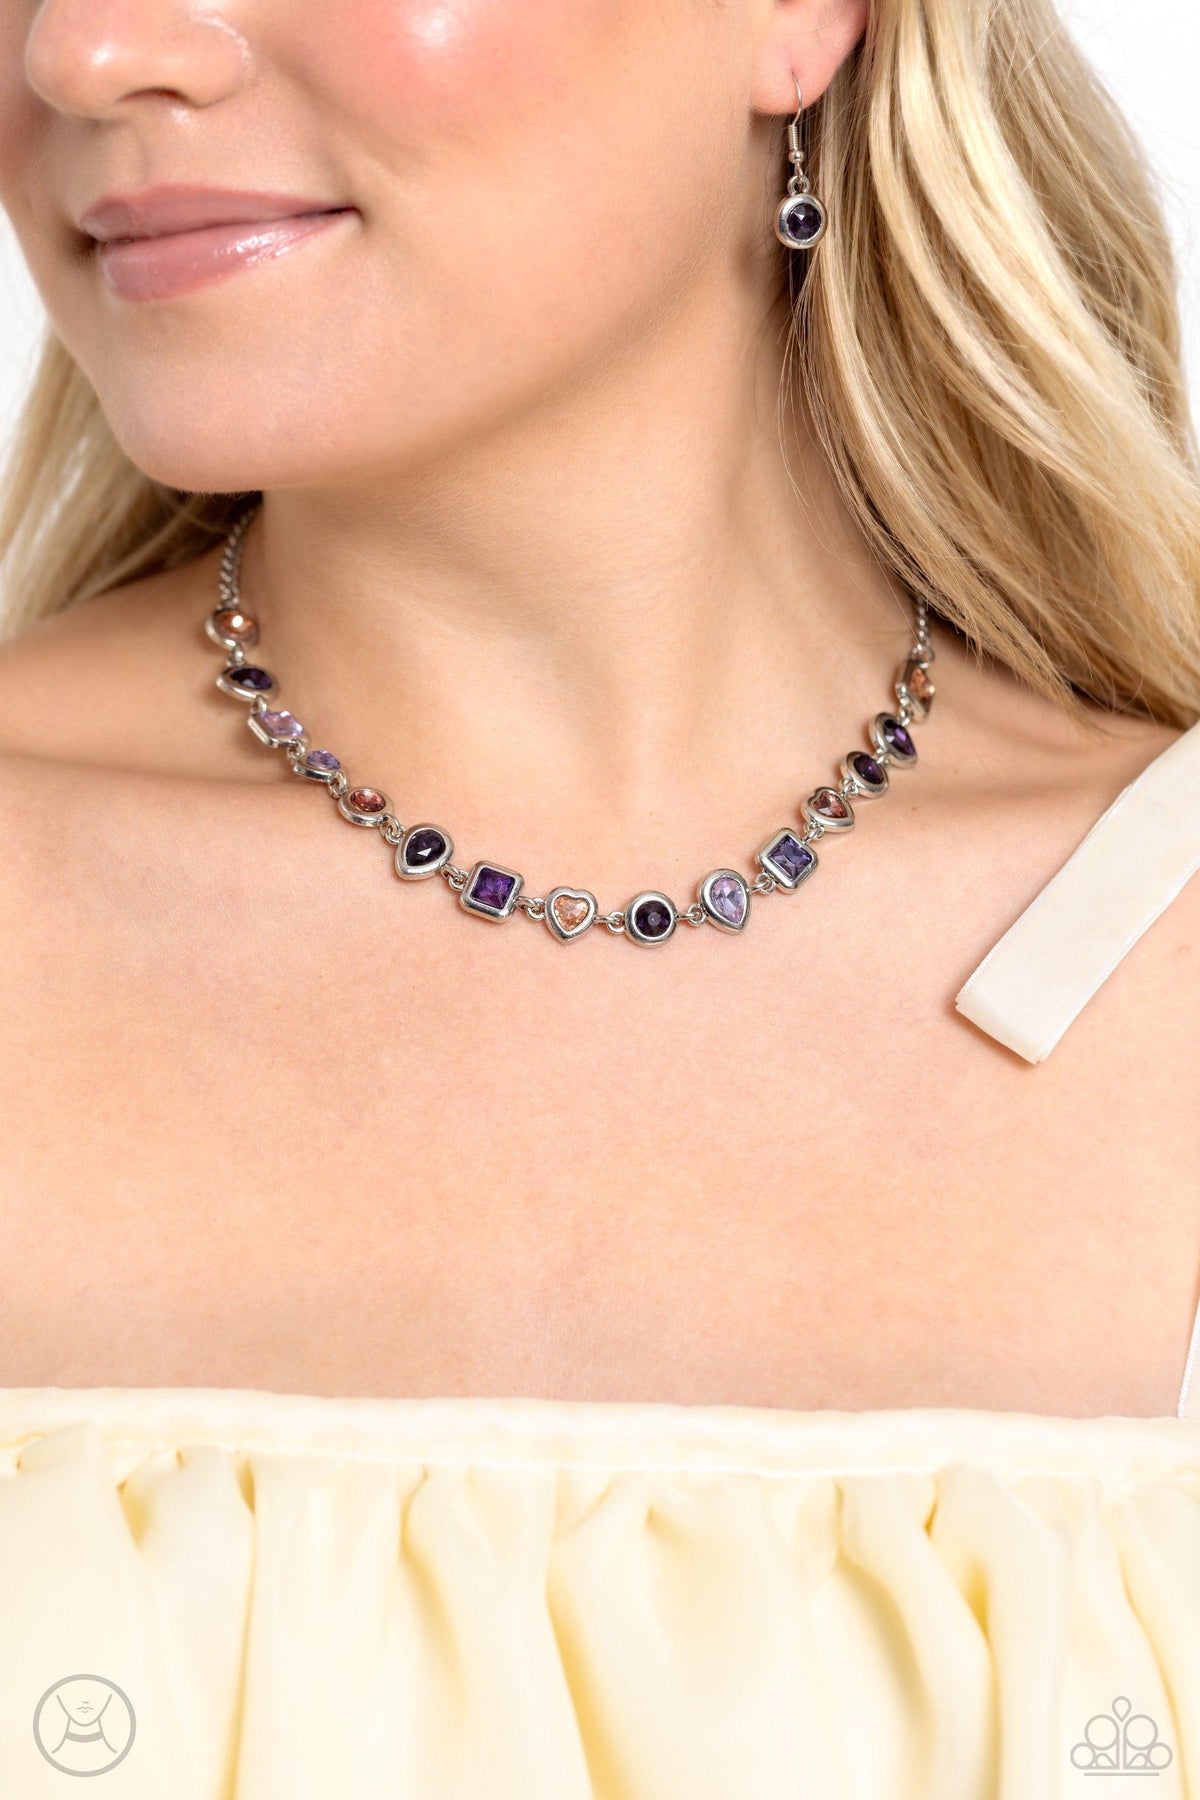 Abstract Admirer Purple Rhinestone Choker Necklace - Paparazzi Accessories-on model - CarasShop.com - $5 Jewelry by Cara Jewels